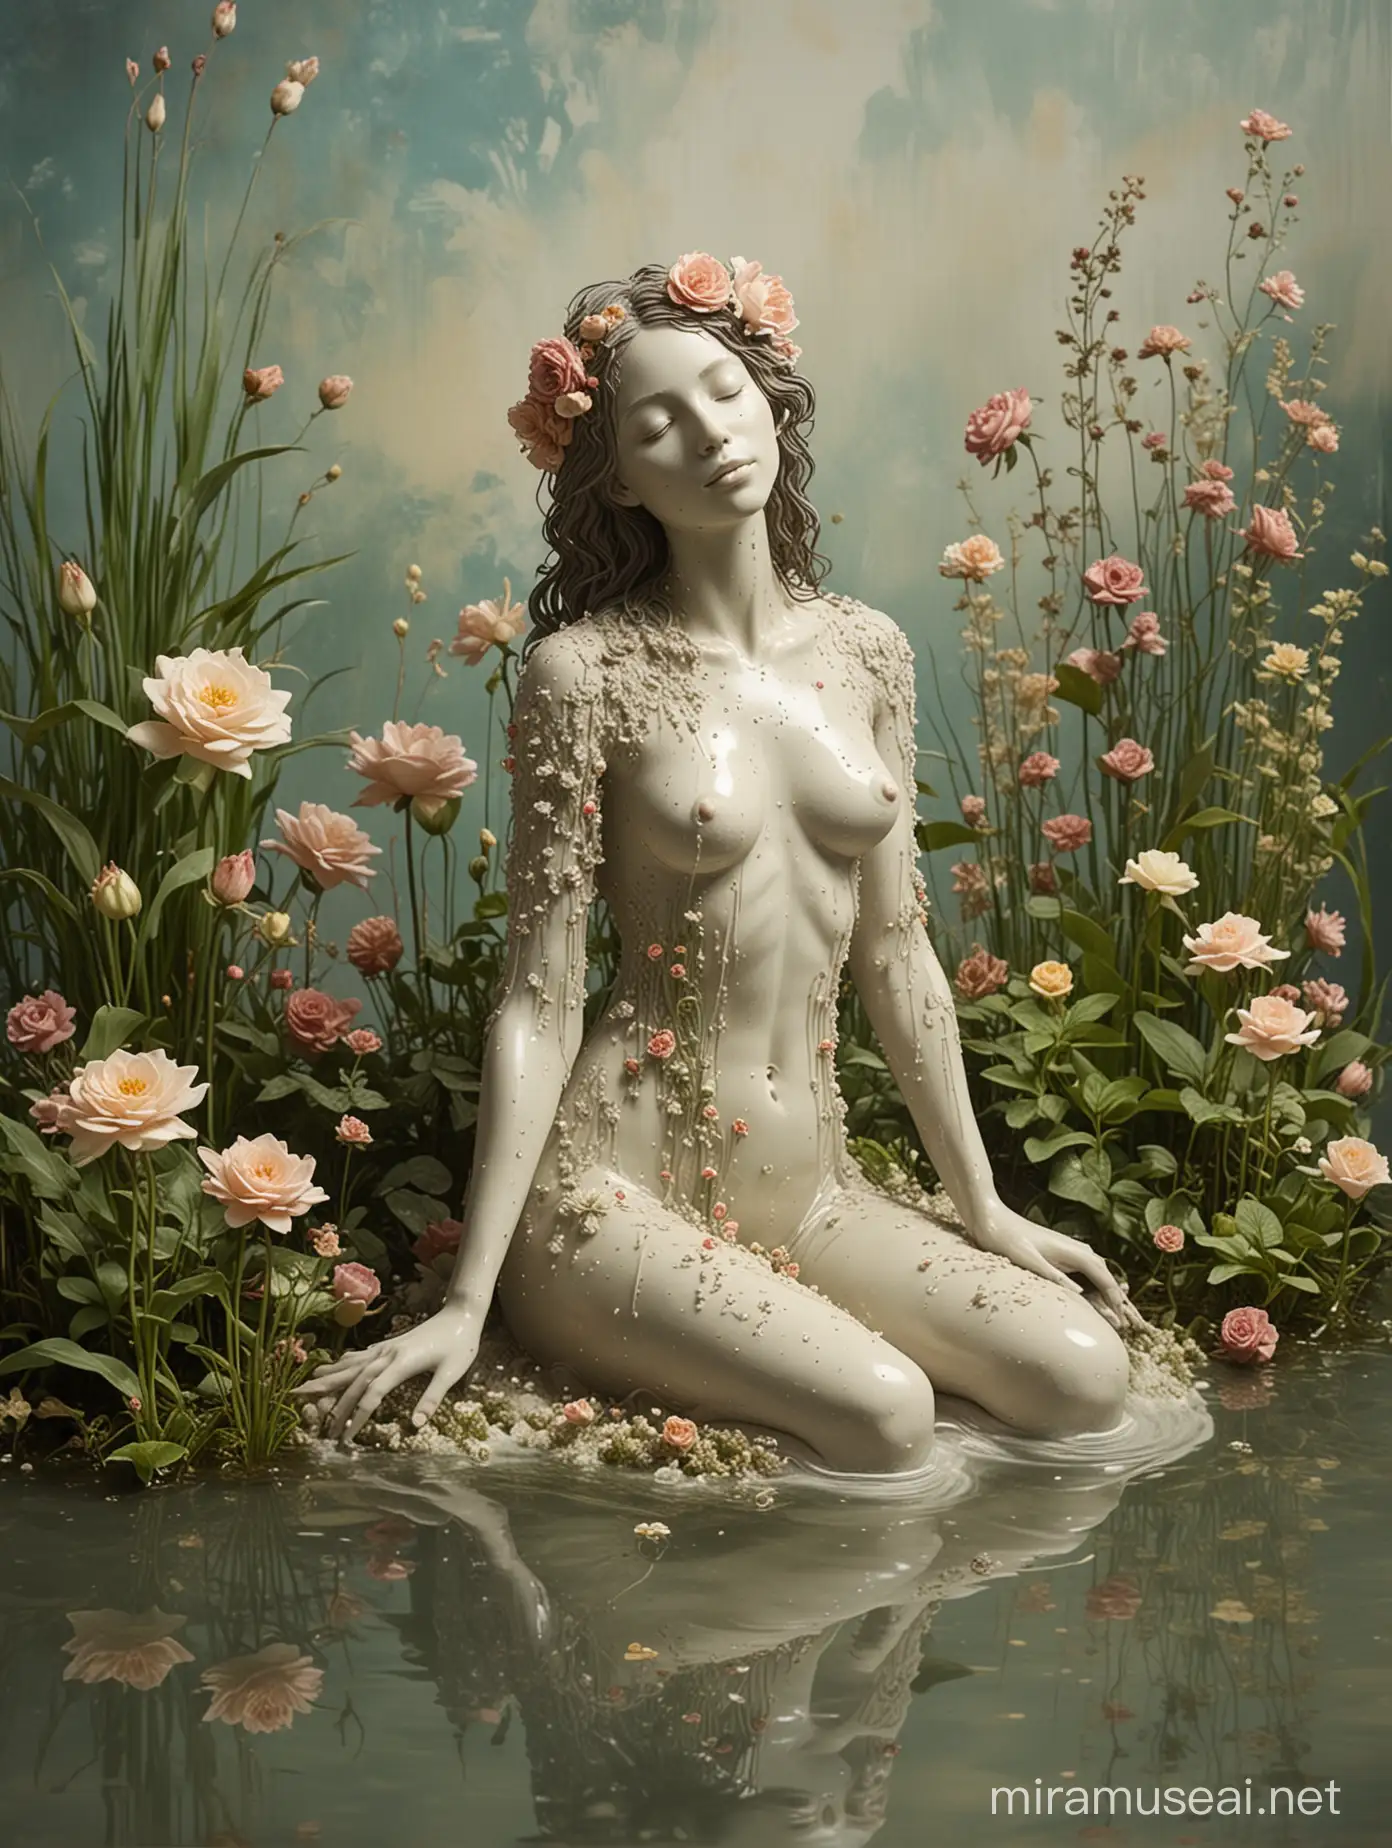 Sculpture of Woman Watering Aquatic Garden with Haute Couture Fashion